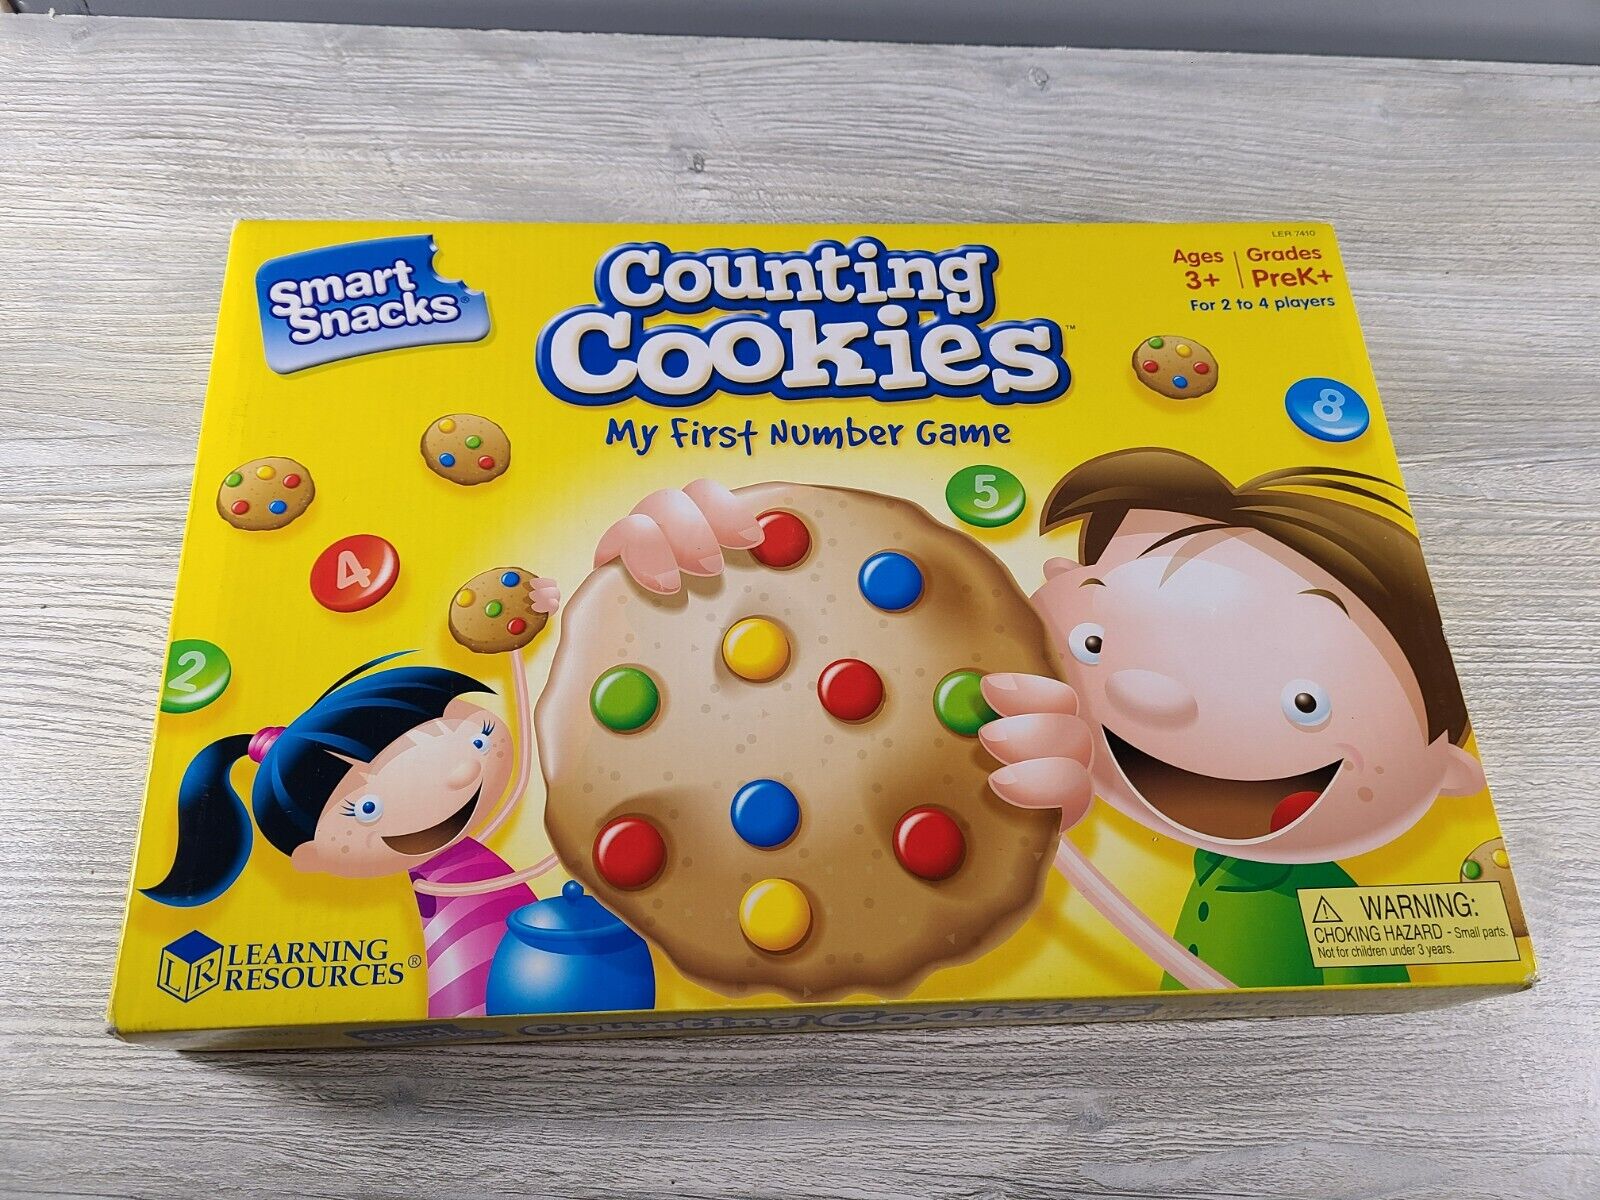 Counting Cookies by learning resources - my first numbers game